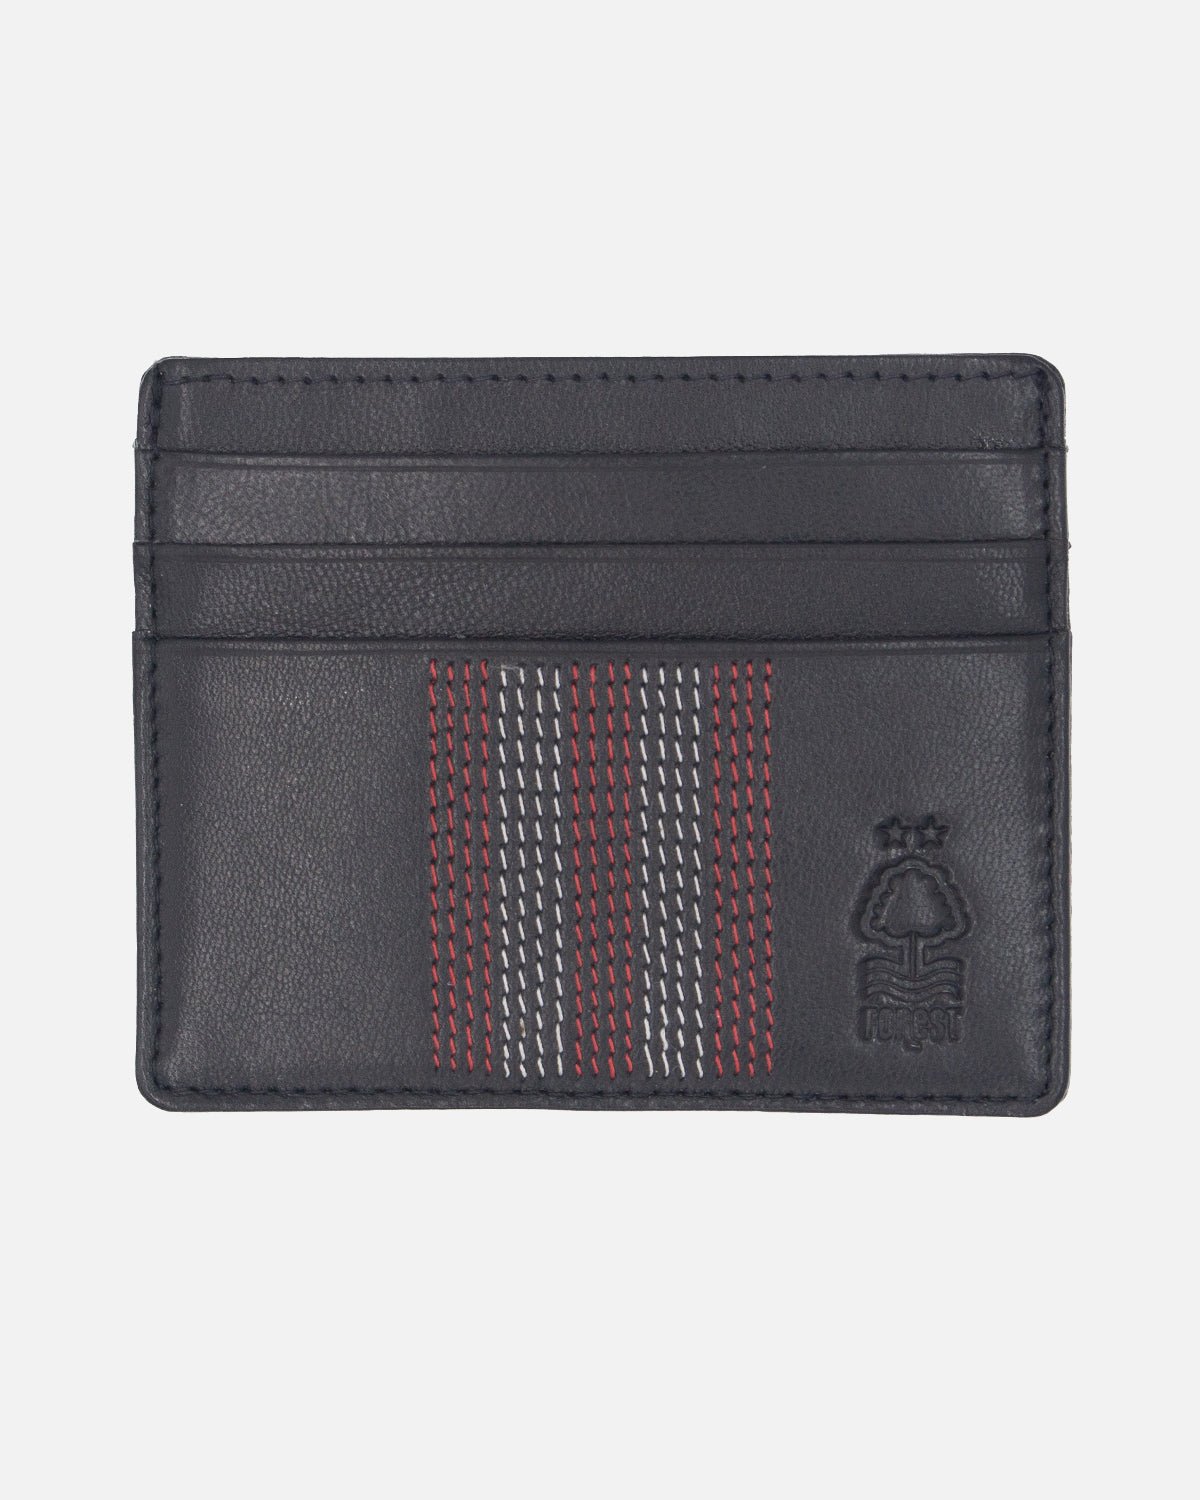 NFFC Waterfall Card Holder - Nottingham Forest FC